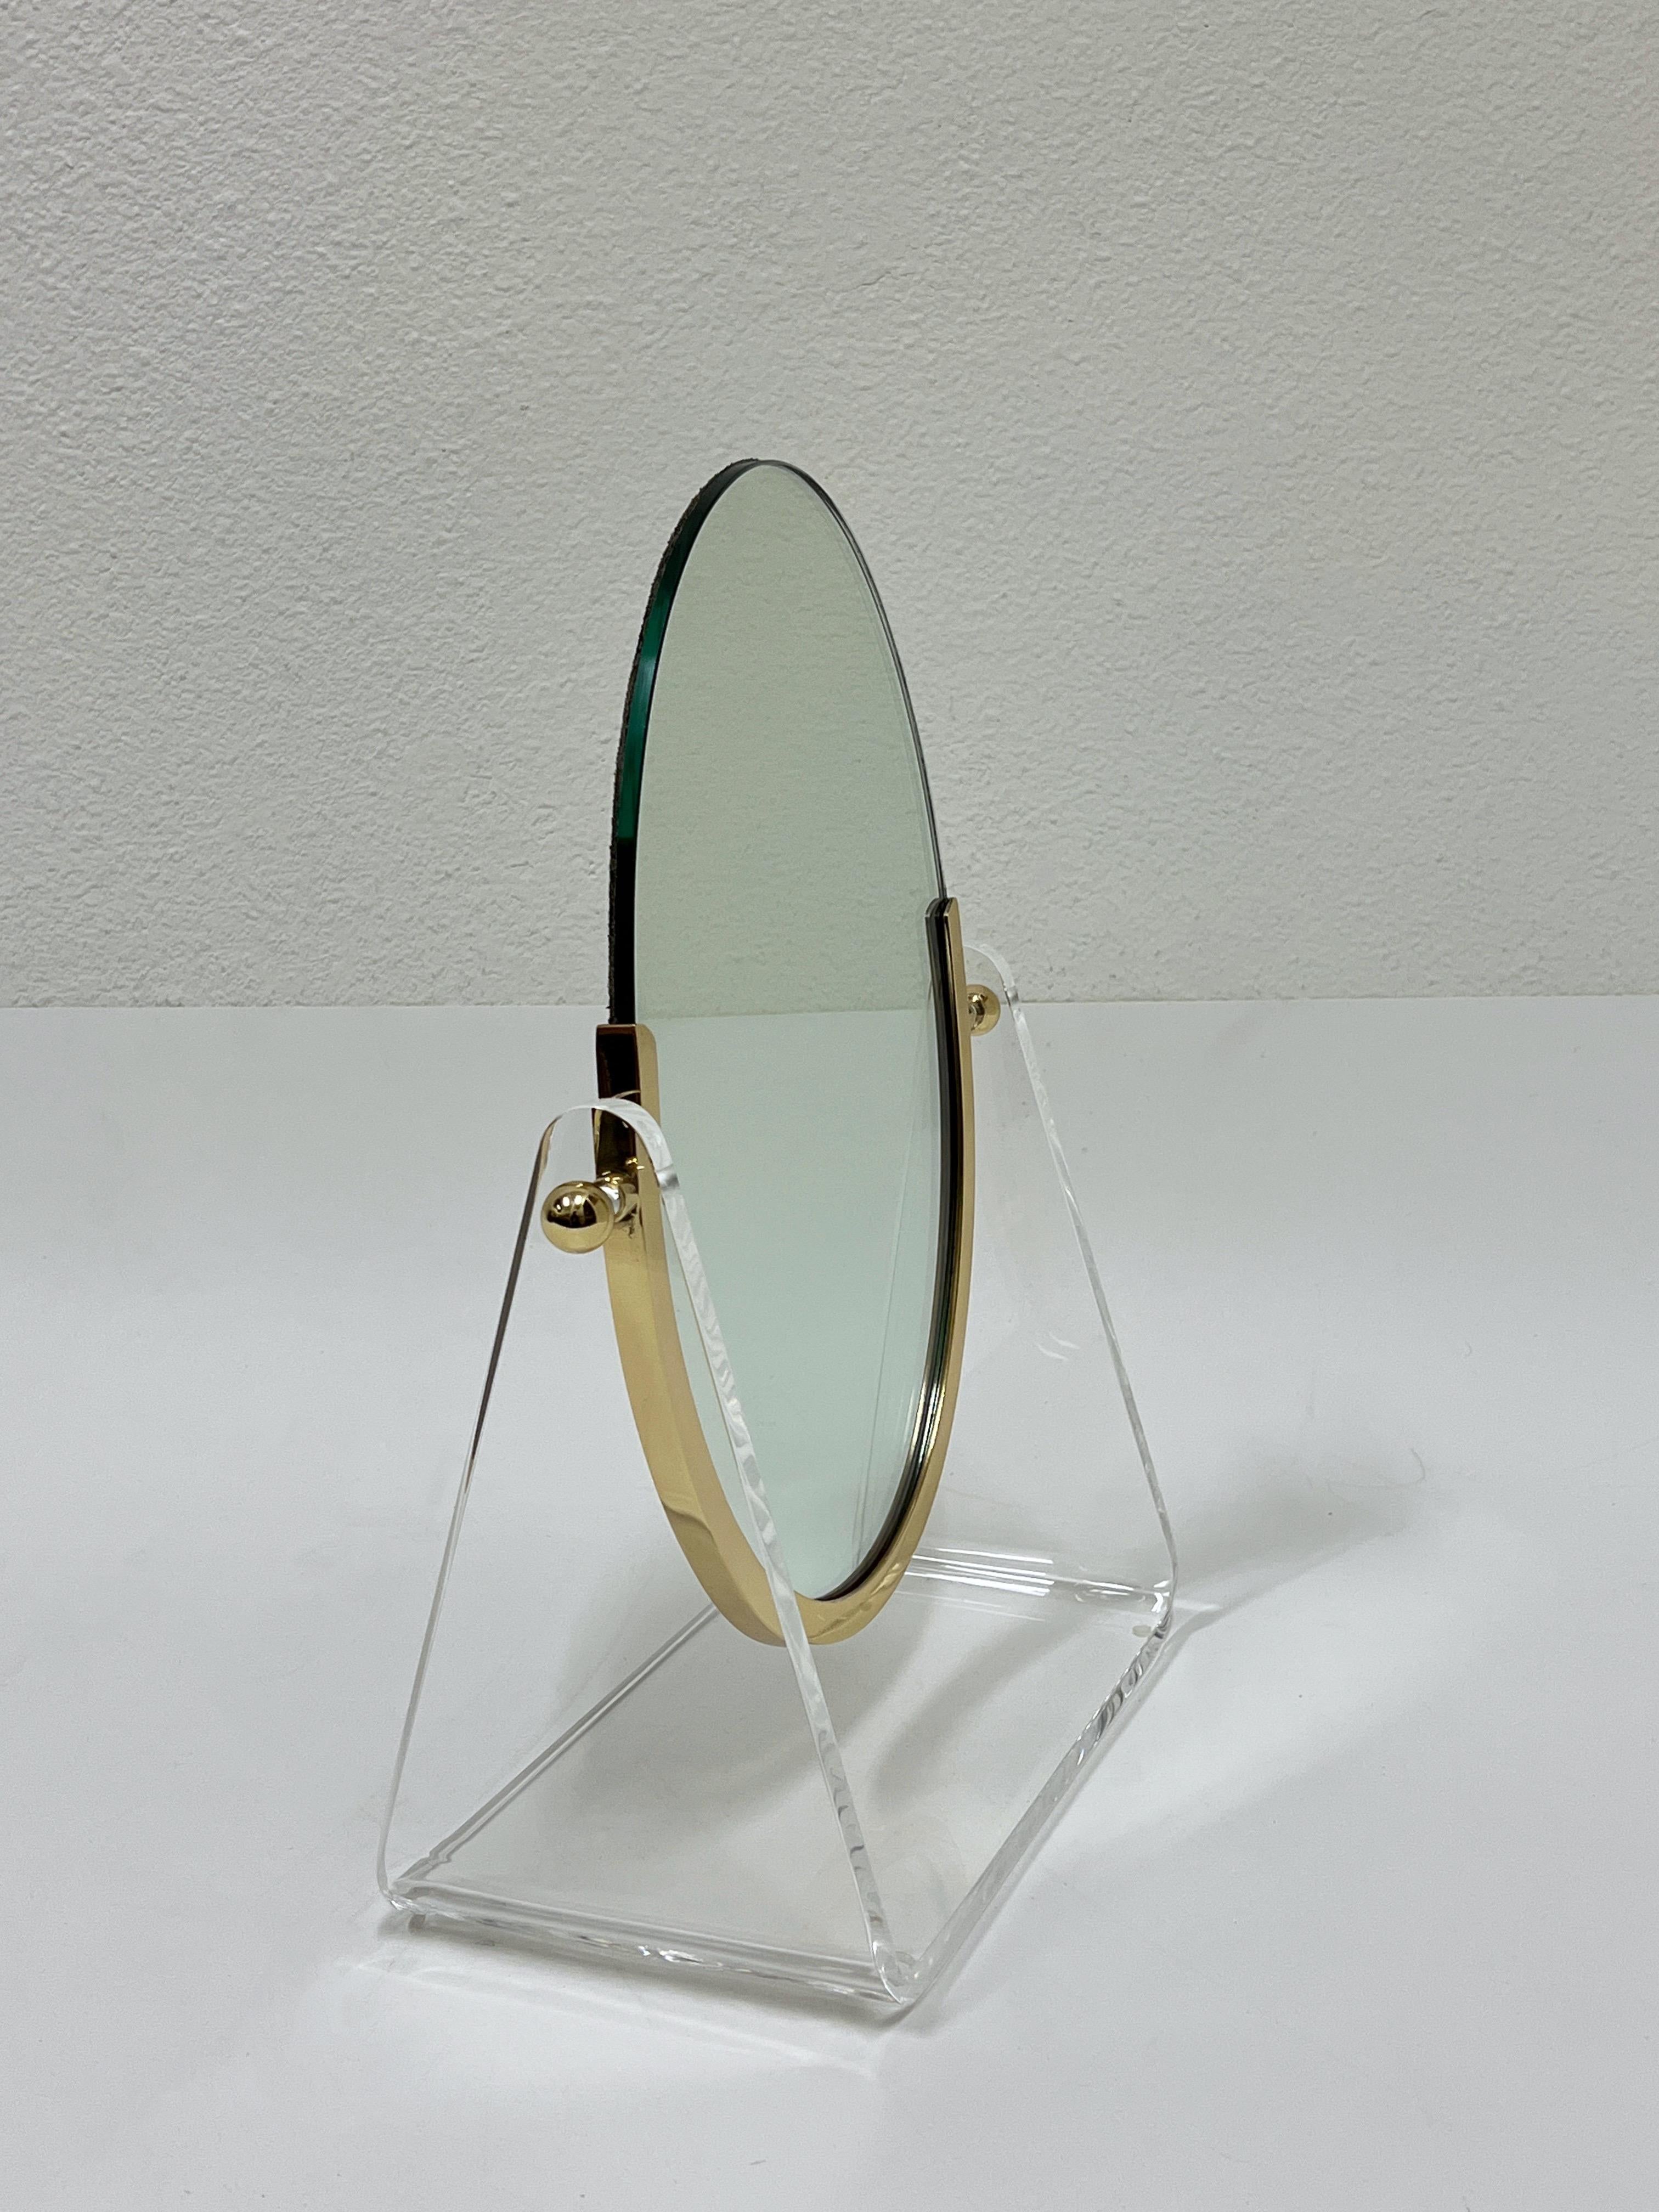 Mid-Century Modern Brass and Lucite Vanity Mirror by Charles Hollis Jones For Sale